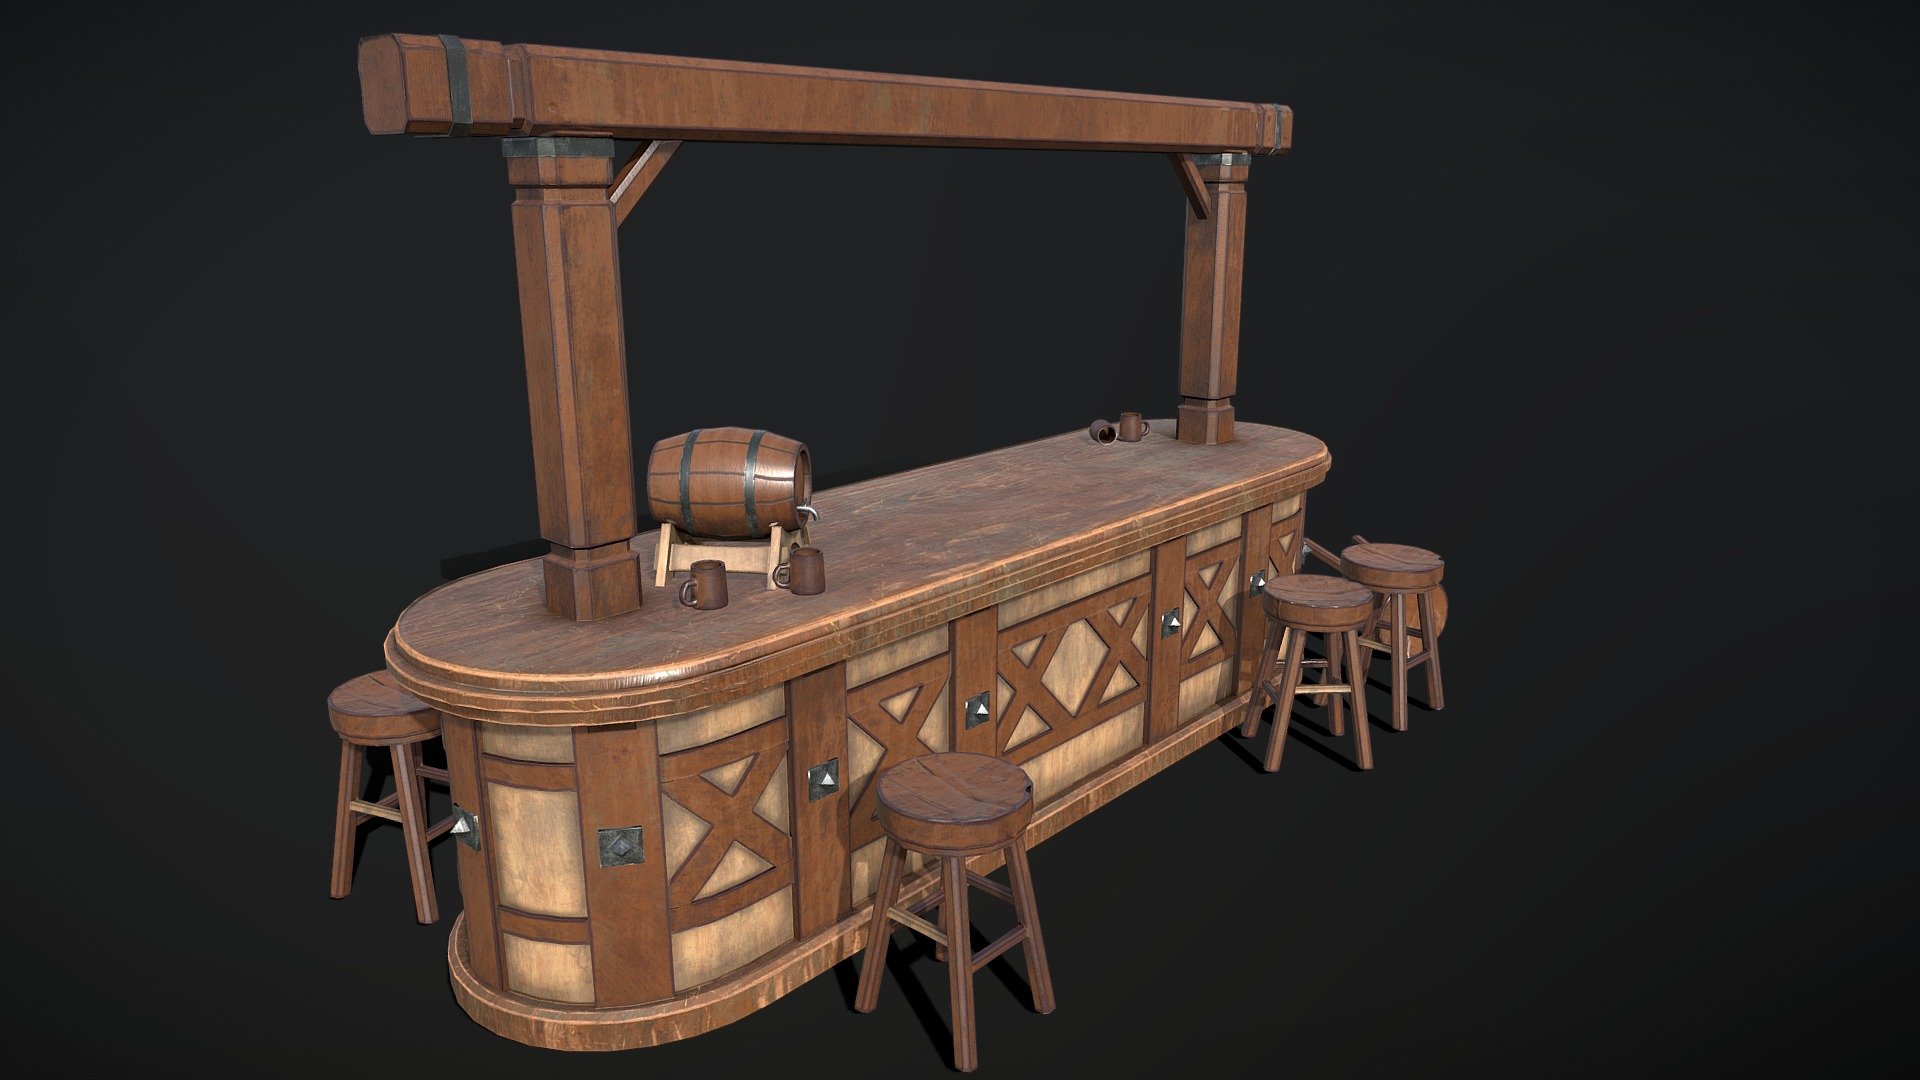 The bar counter is medieval. A great asset for your game.
low poly game assets/ Game ready
4k textures/
Enjoy yourself ))) - Beer_Bar - Download Free 3D model by Viktor_ (@Viktor.Zhuravlev) 3d model